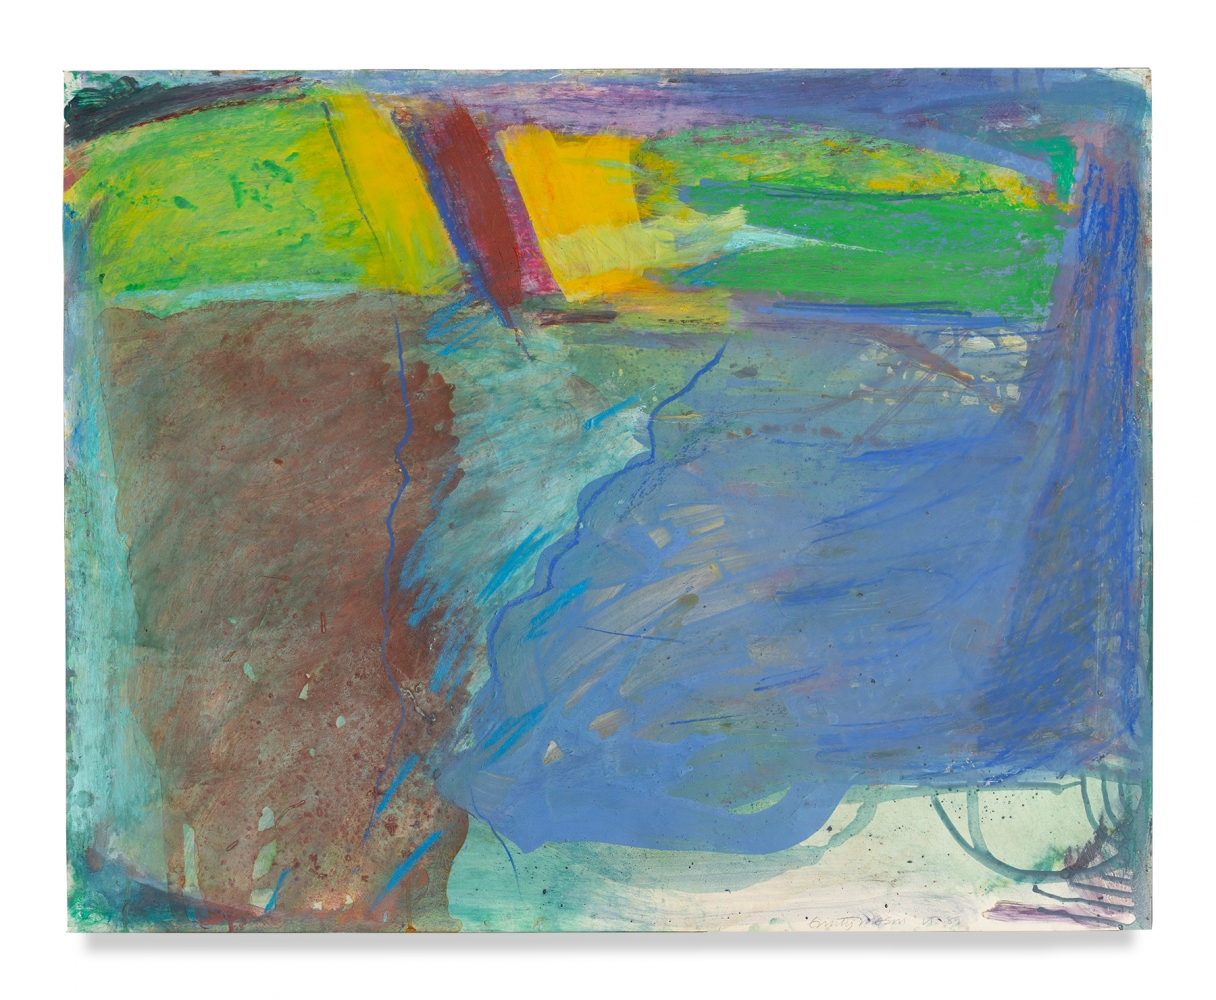 Emily Mason

And Miles To Go, 1989

Oil on paper

23h x 29w in

EM014